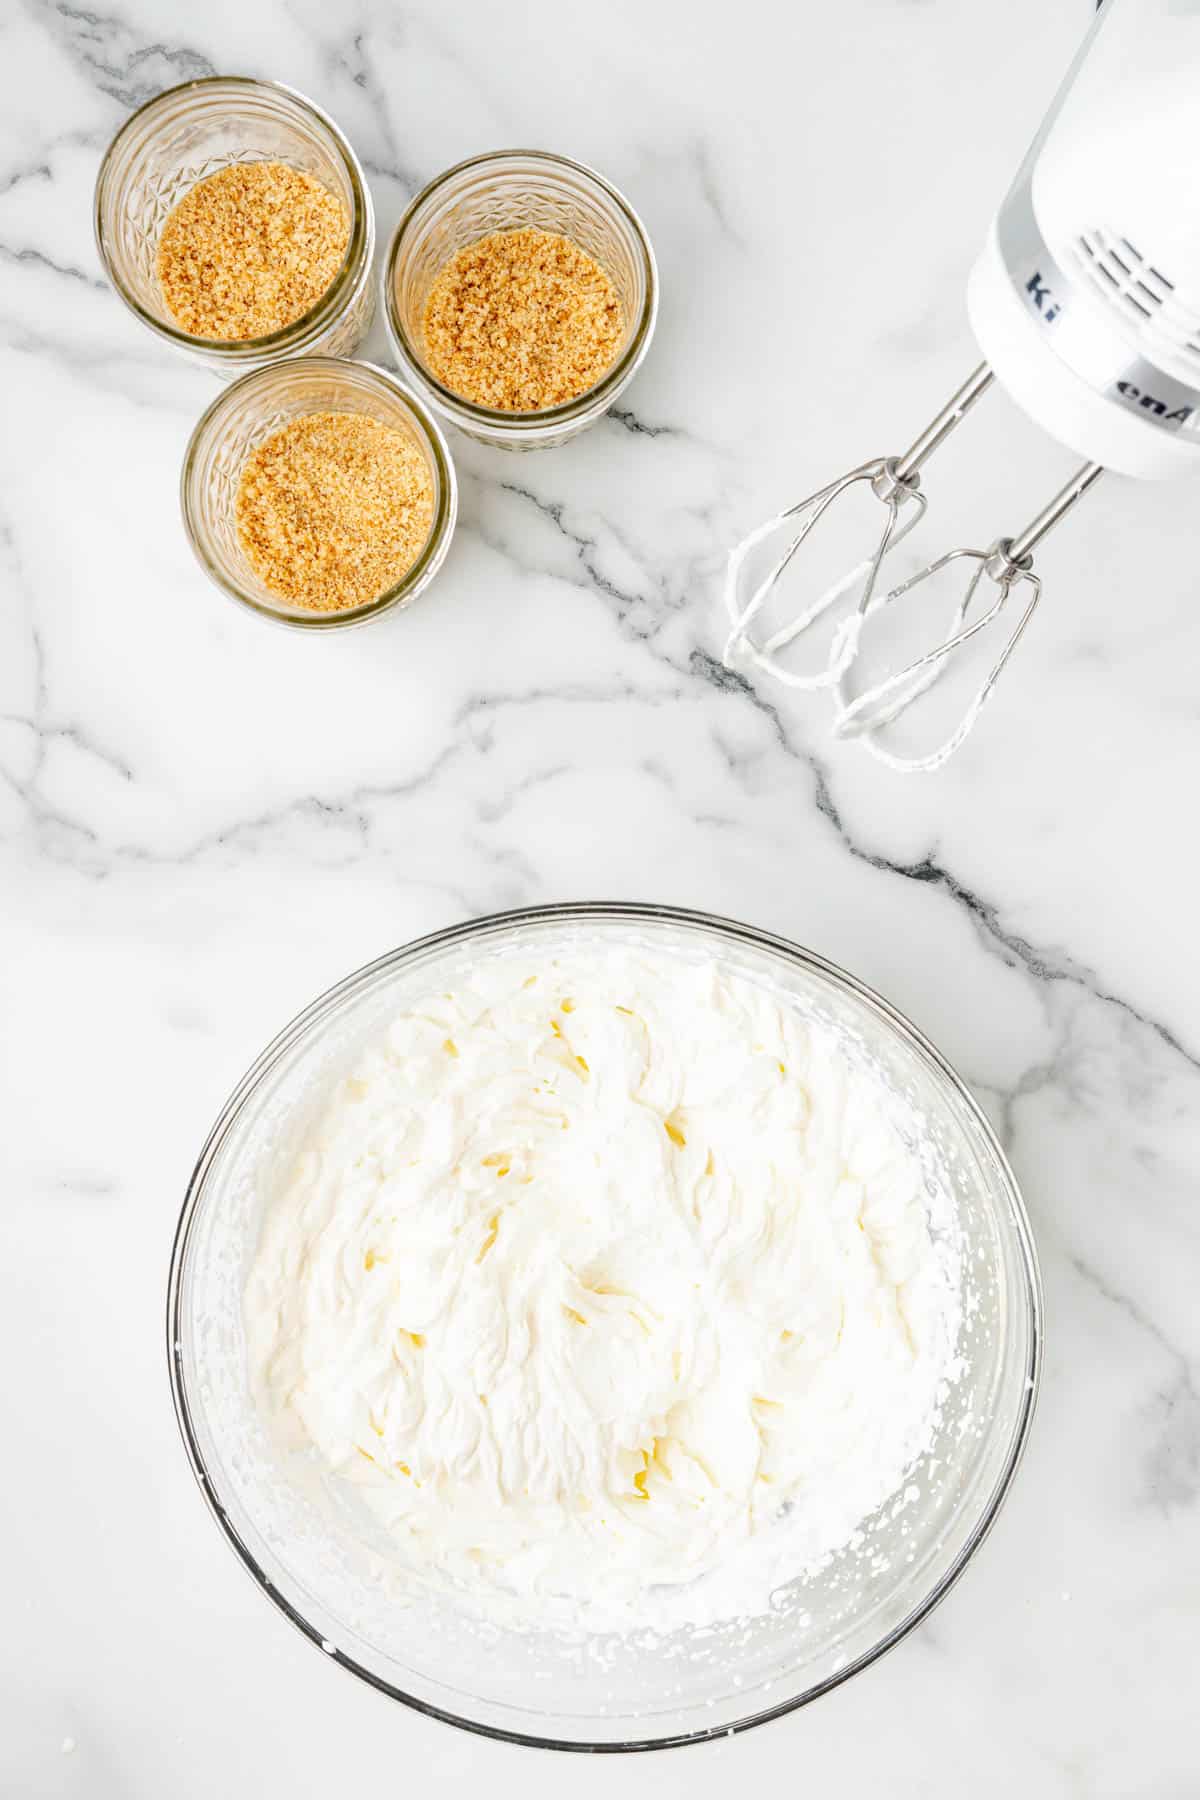 Adding sugar to cream cheese for a no-bake cheesecake filling.